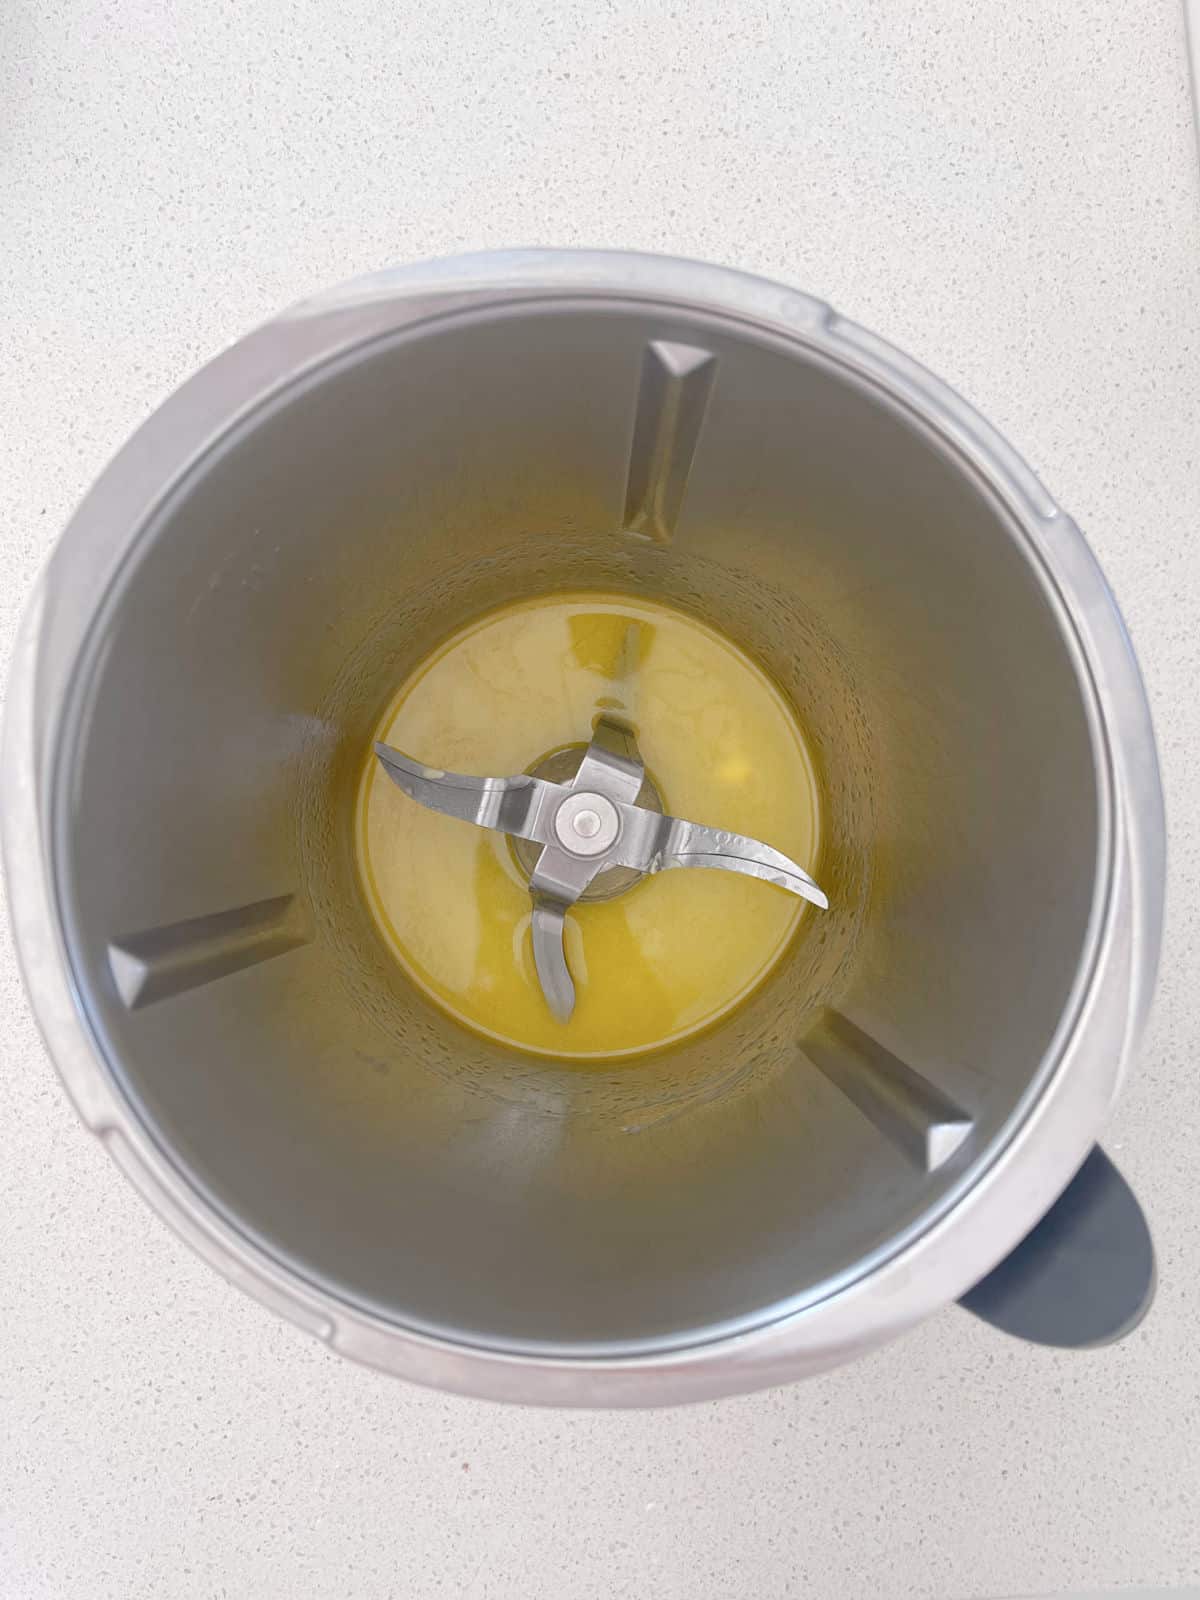 melted butter in a thermomix bowl.